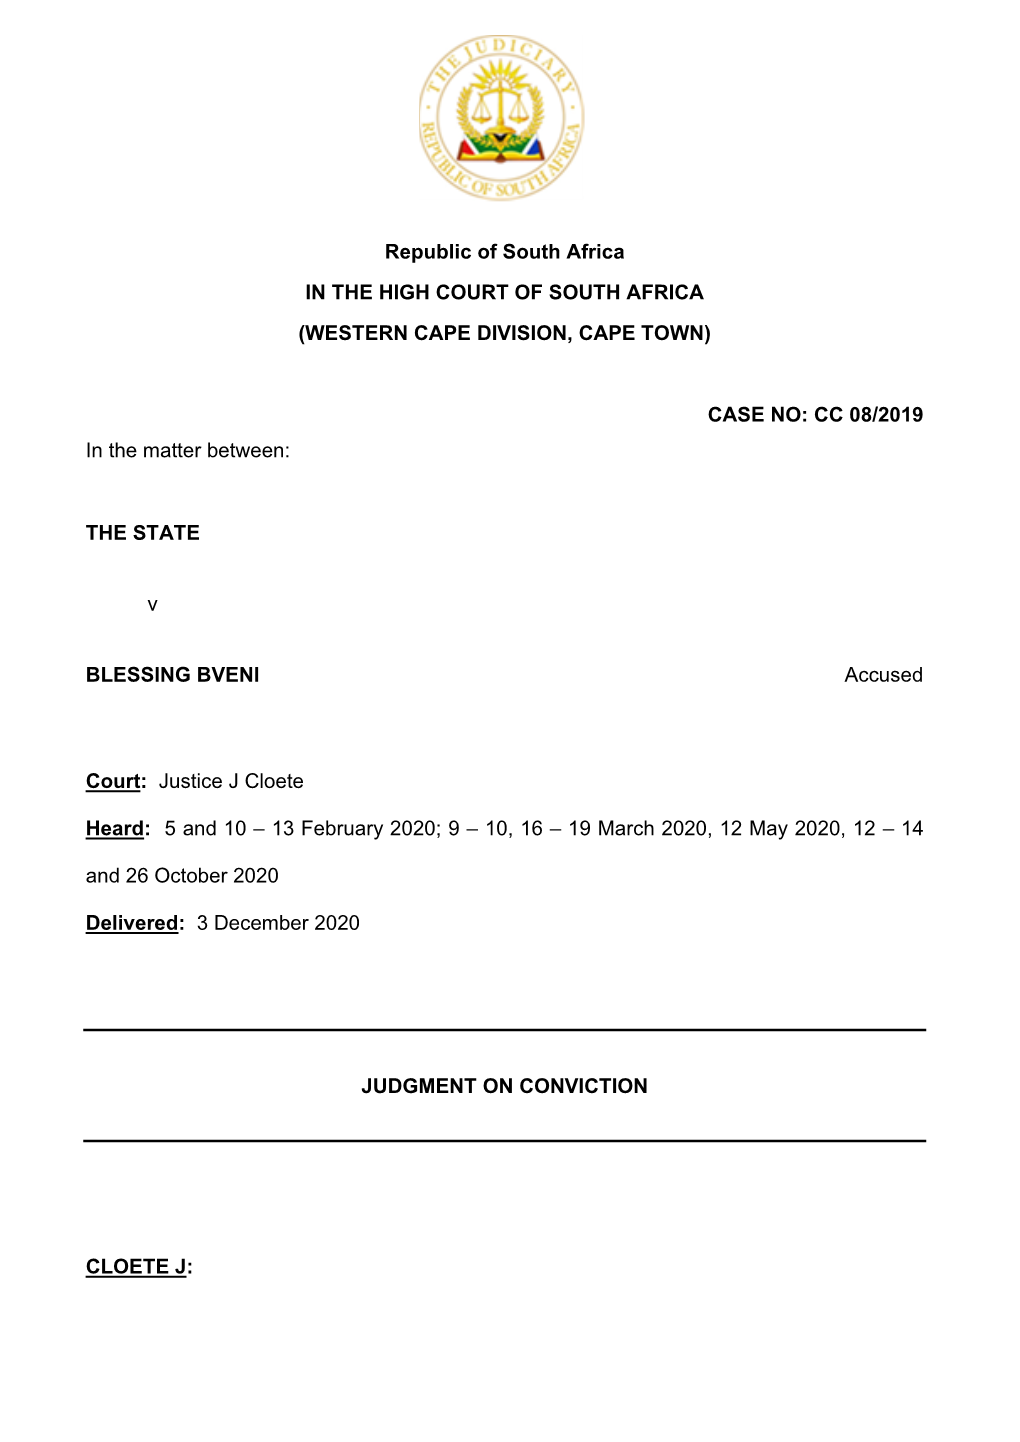 Republic of South Africa in the HIGH COURT of SOUTH AFRICA (WESTERN CAPE DIVISION, CAPE TOWN) CASE NO: CC 08/2019 in the Matter